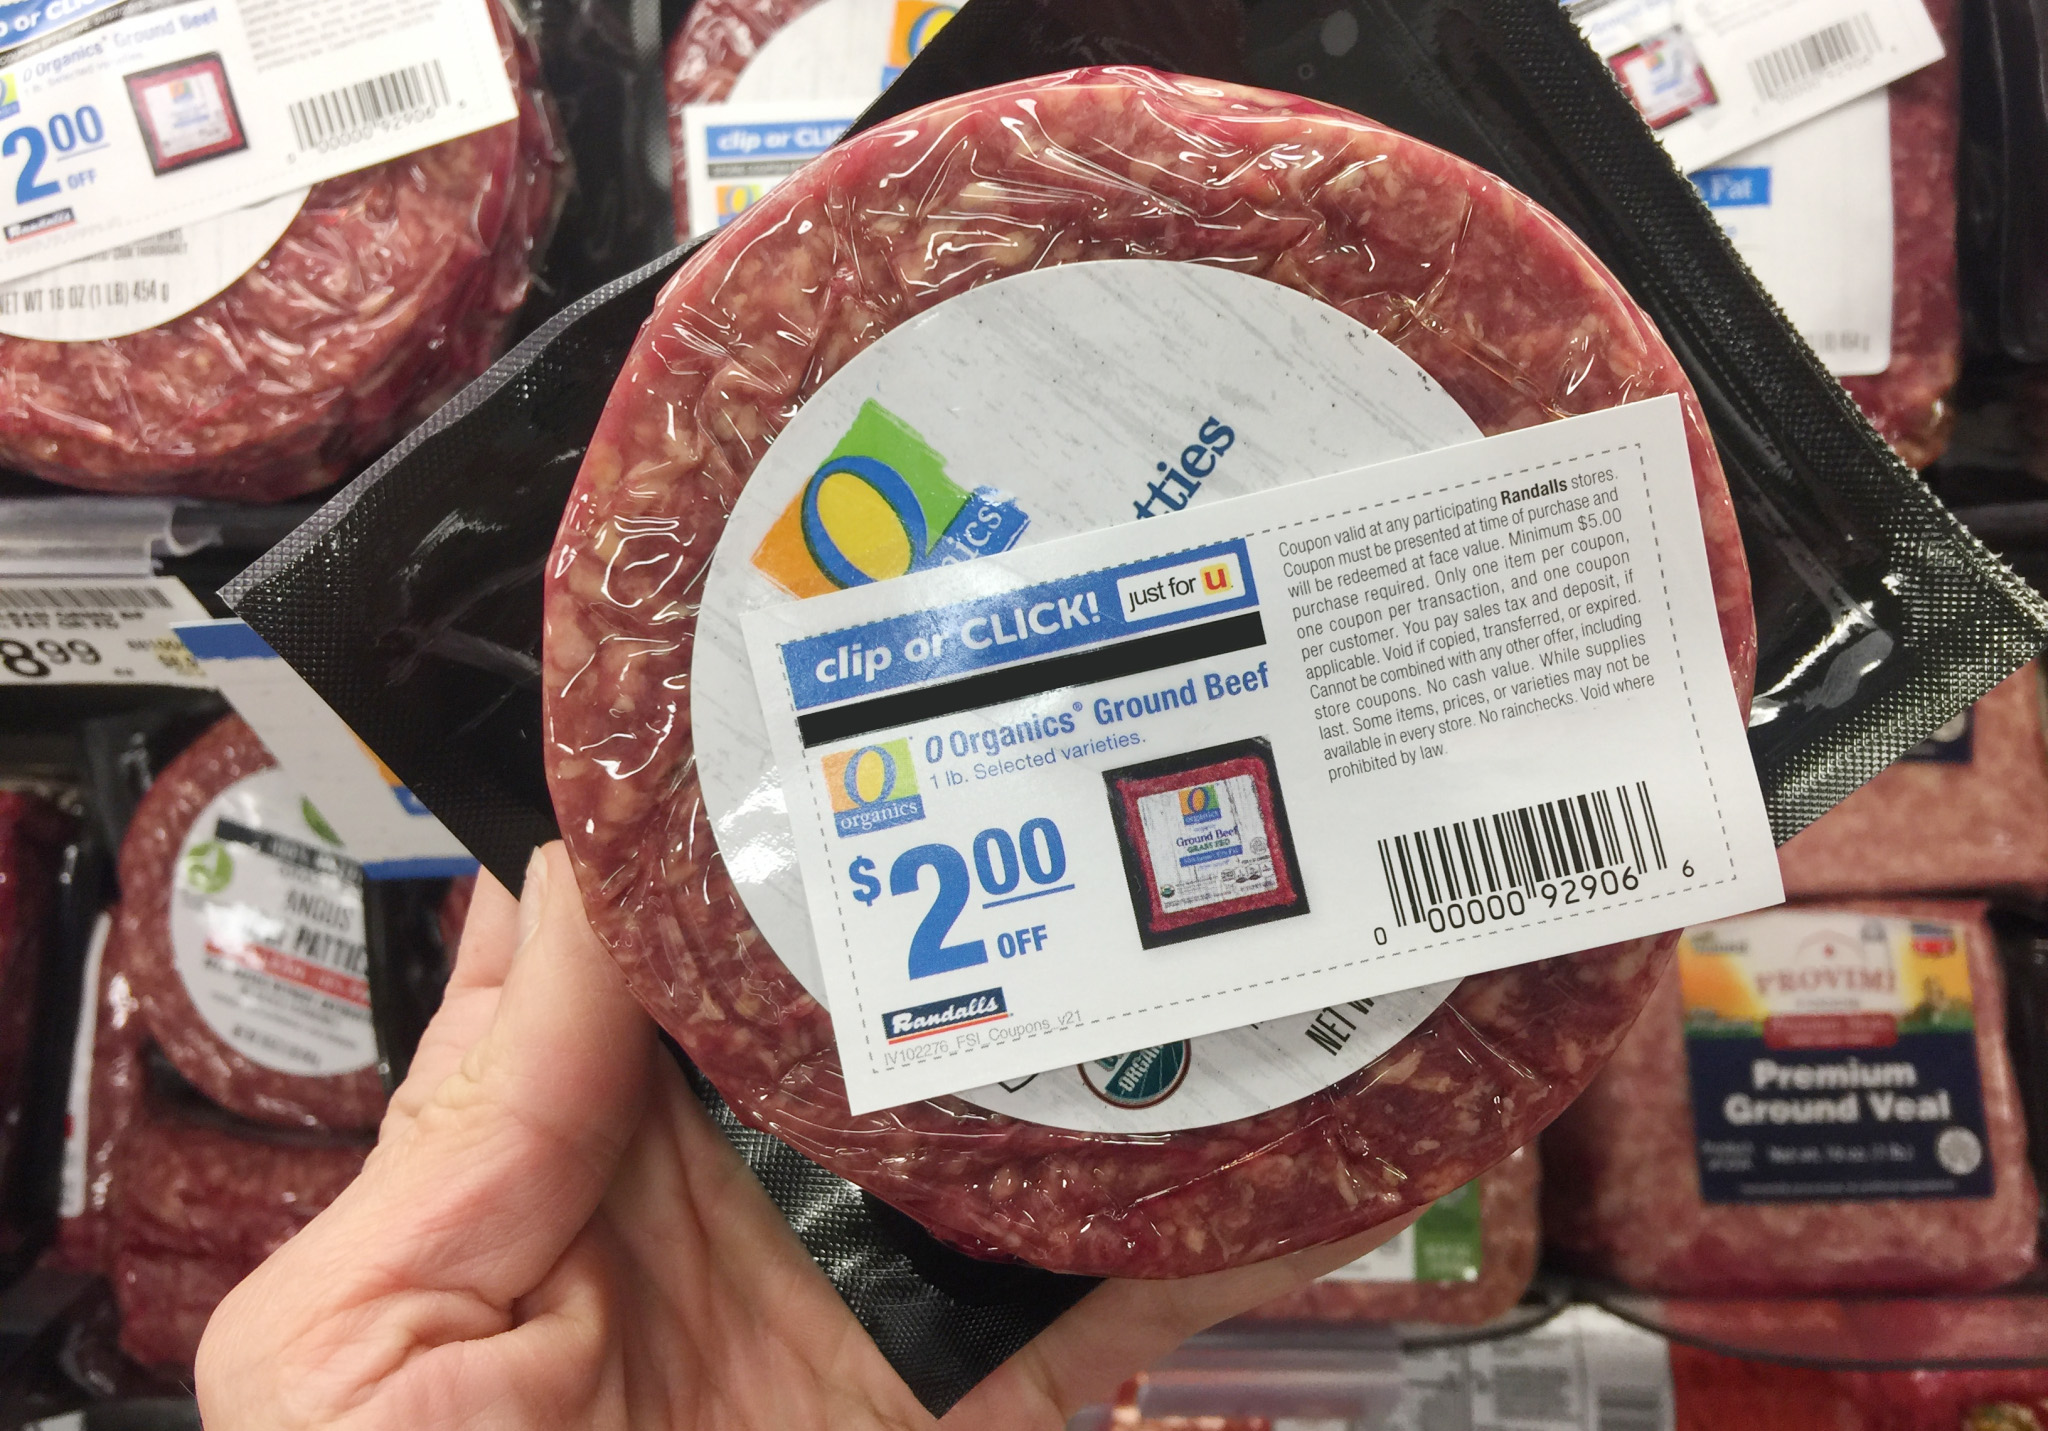 Protein on a Budget: How to Find Affordable Meat That Won't Break the Bank